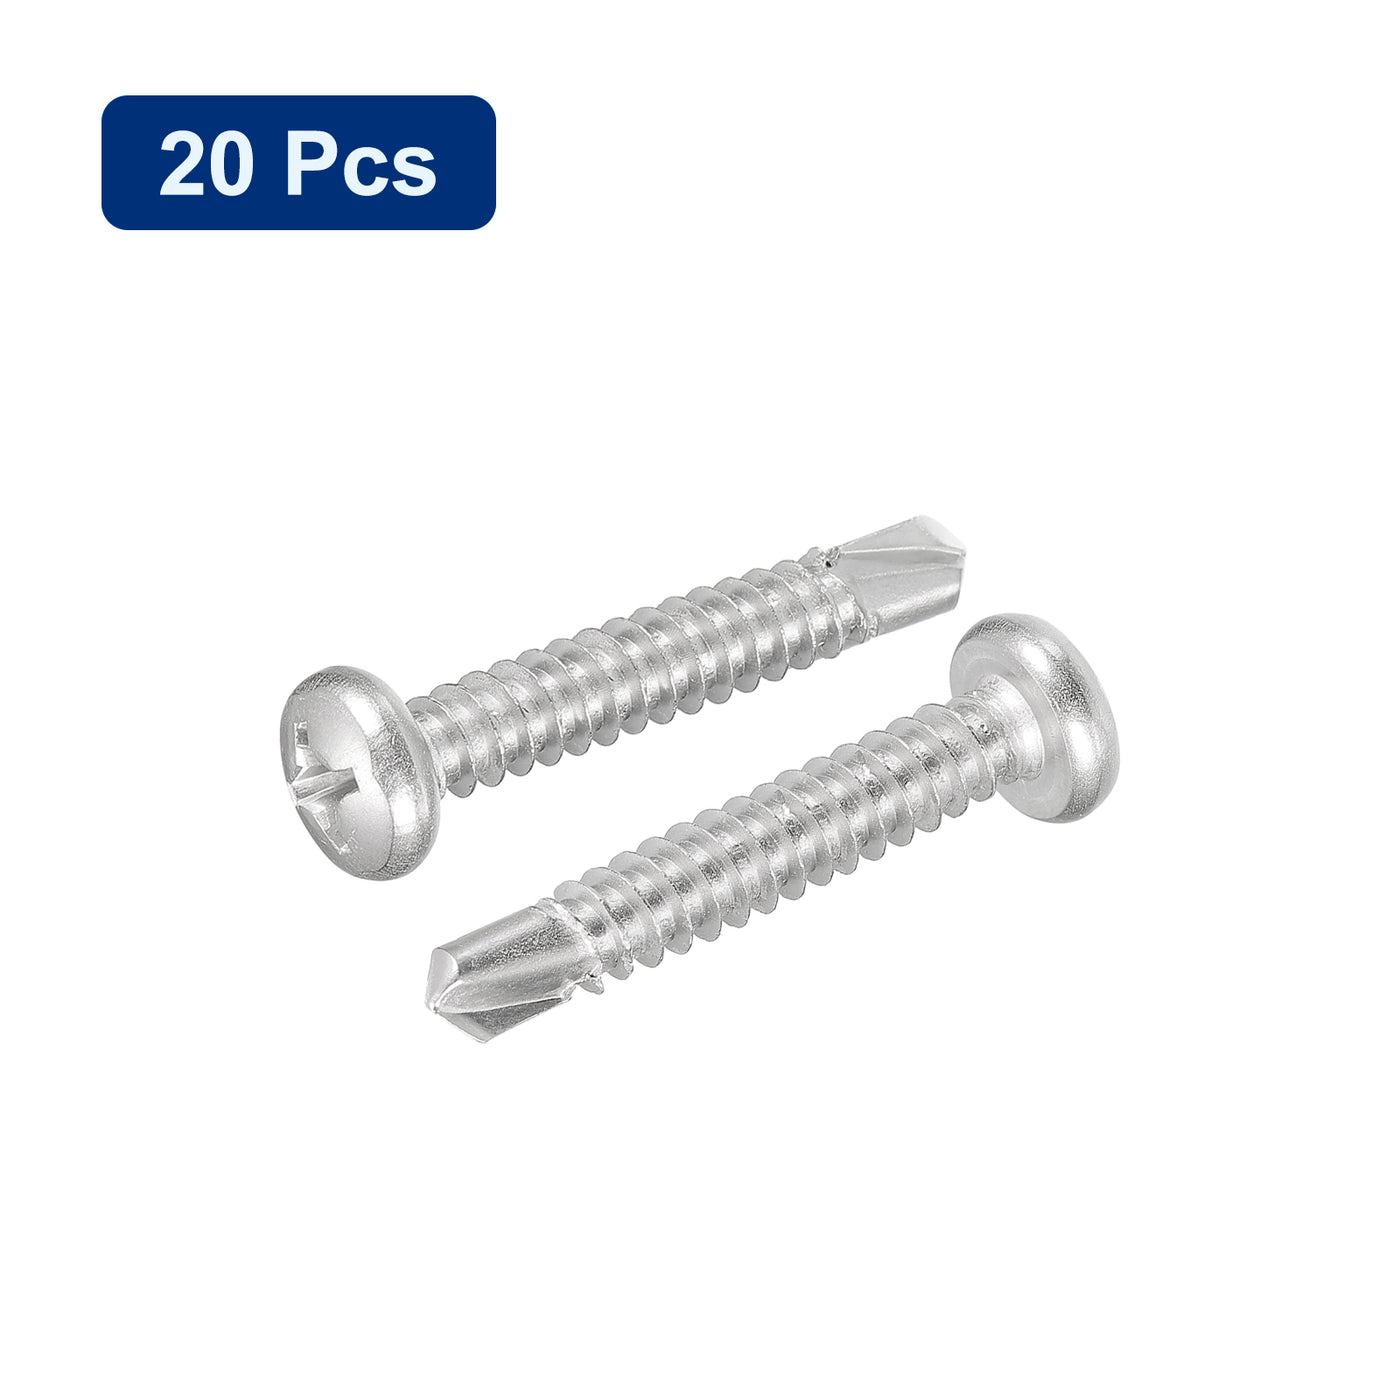 uxcell Uxcell #14 x 1-1/2" Self Drilling Screws, 20pcs Phillips Pan Head Self Tapping Screws